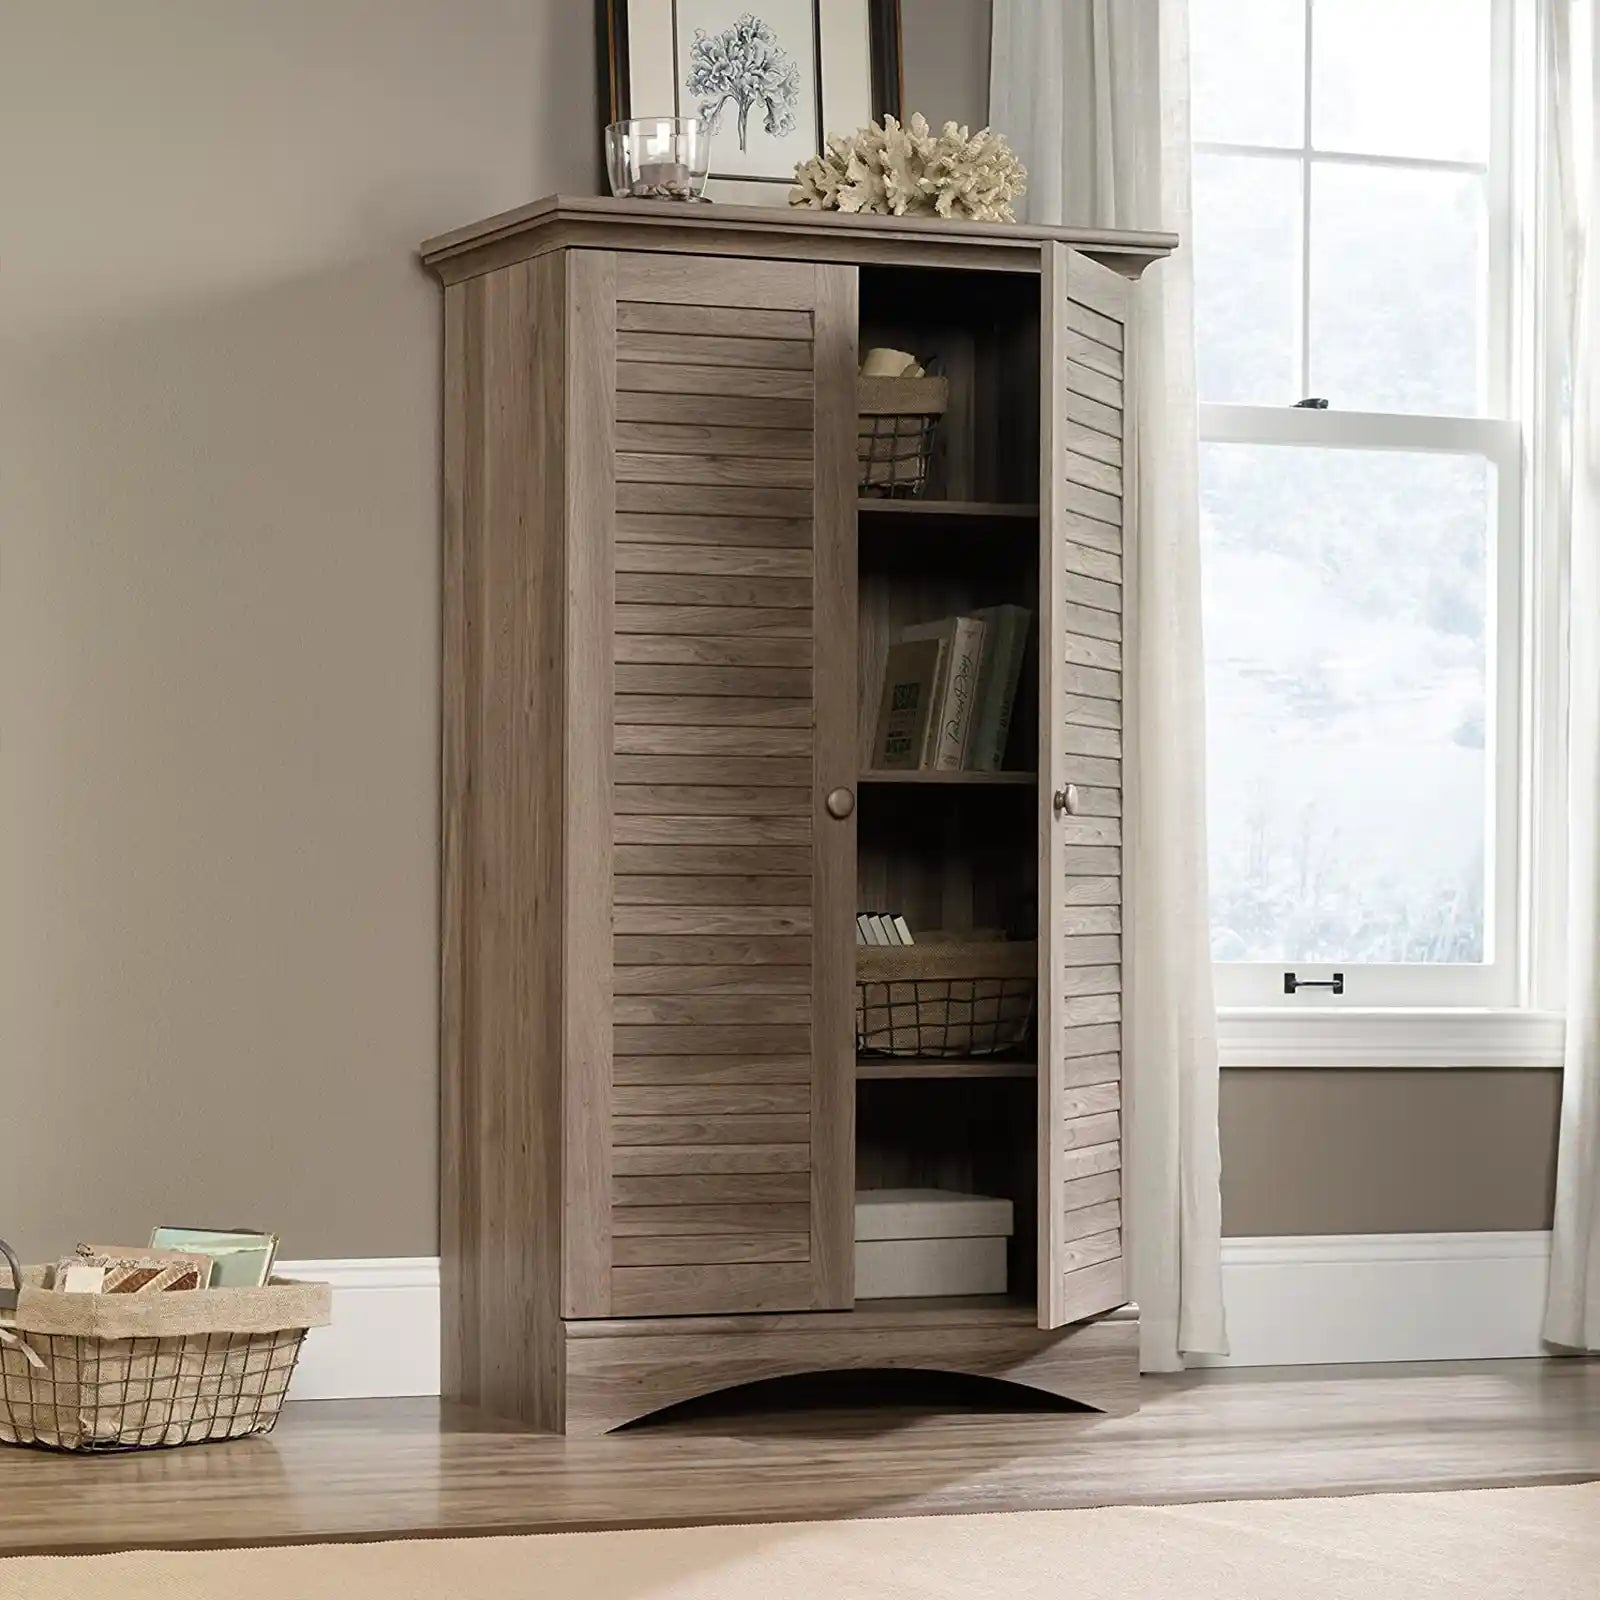 Contemporary Storage Wardrobes and Cabinet